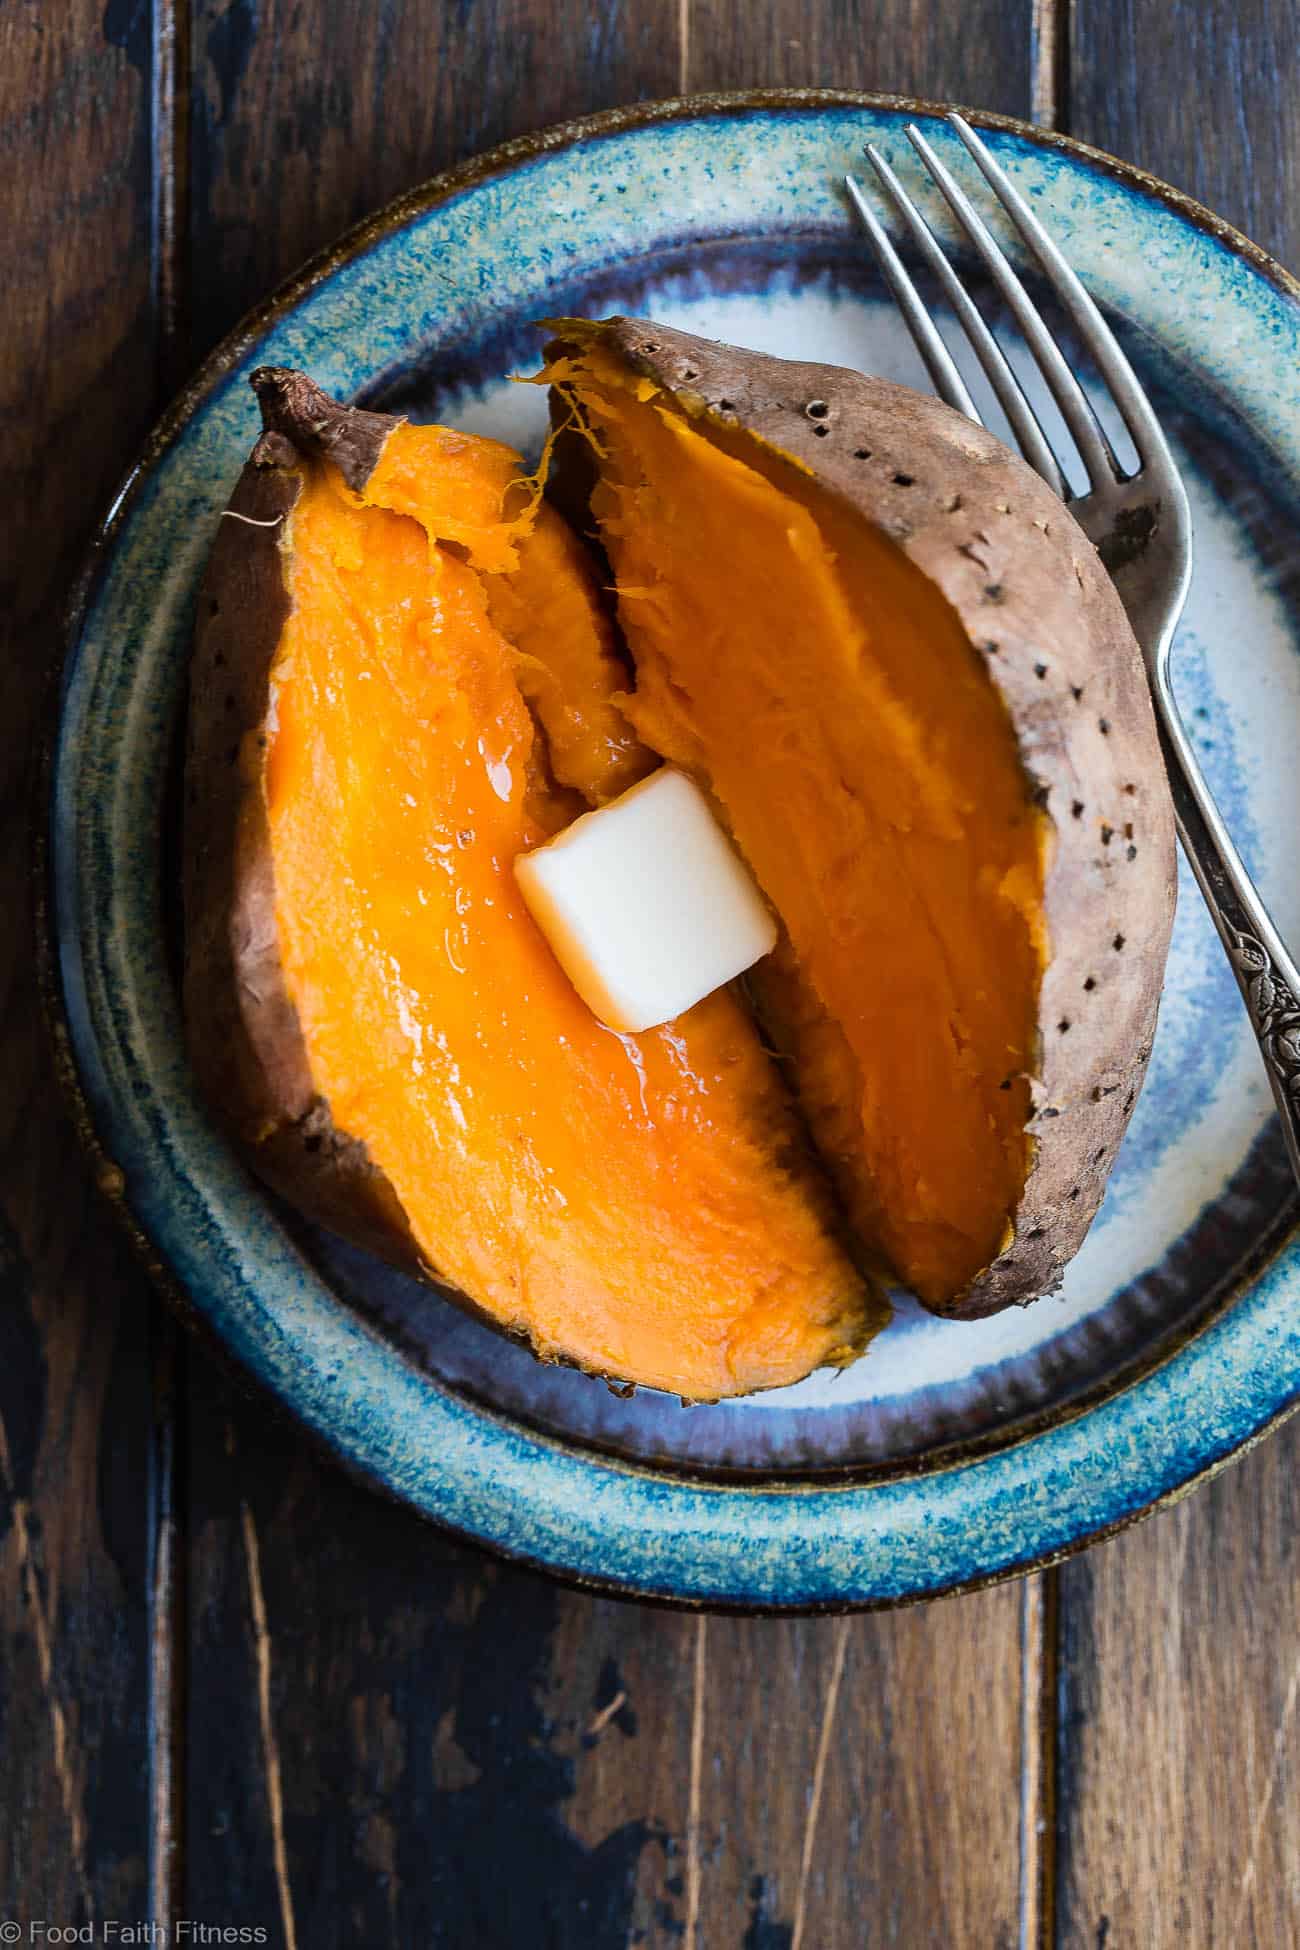 How to Cook Sweet Potatoes in the Crock Pot - Let the slow cooker do all the work for you! These sweet potatoes are SO easy and come out perfect EVERY TIME! A healthy, paleo, vegan and whole30 side dish! | #Foodfaithfitness | #Paleo #Glutenfree #Healthy #Slowcooker #Crockpot